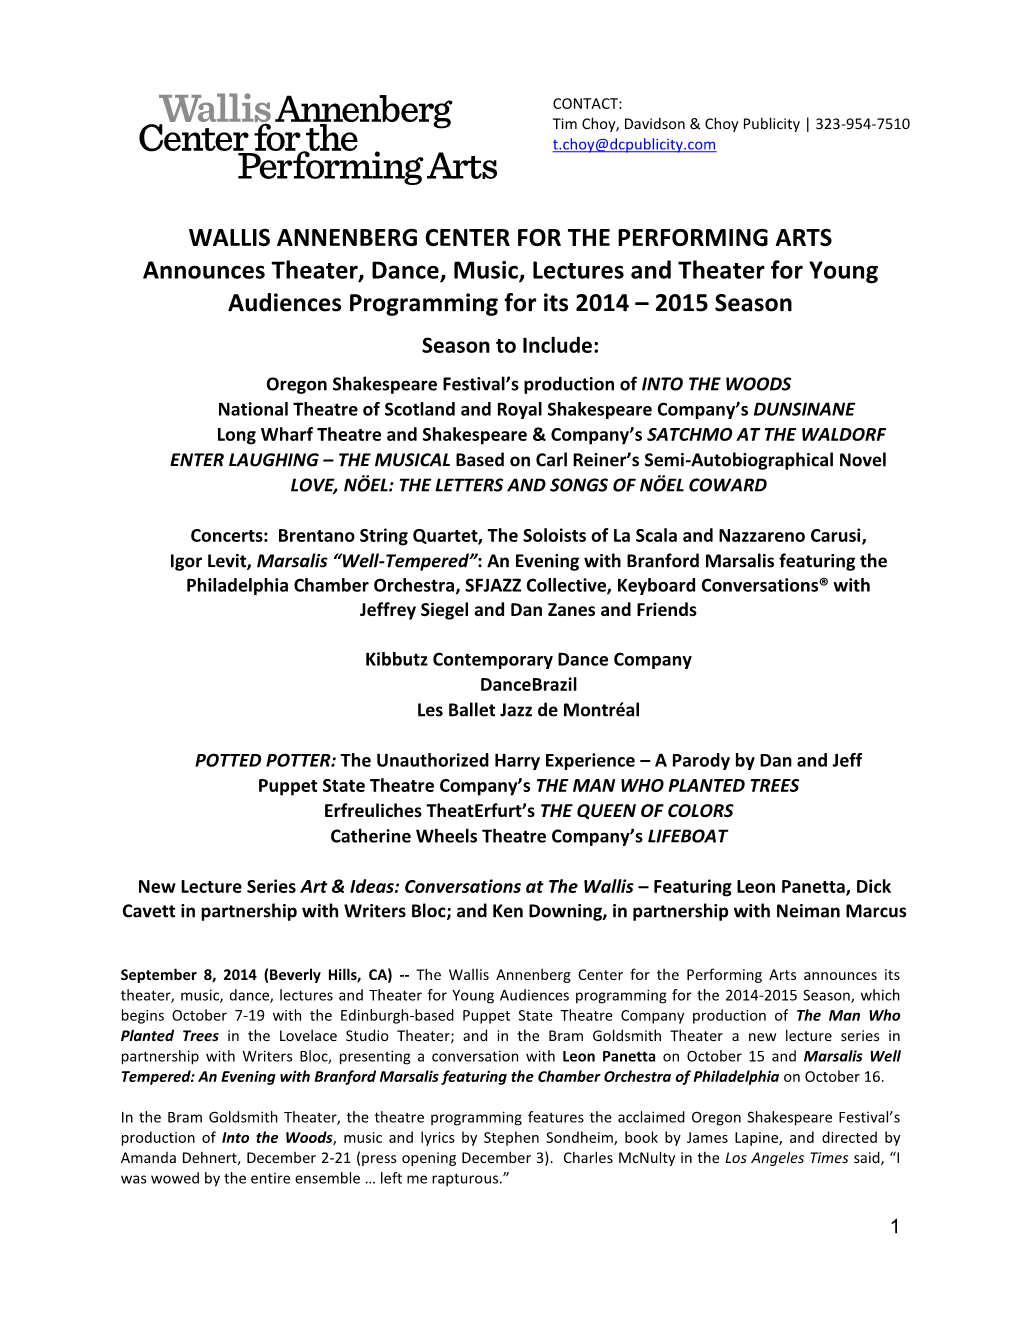 WALLIS ANNENBERG CENTER for the PERFORMING ARTS Announces Theater, Dance, Music, Lectures and Theater for Young Audiences Programming for Its 2014 – 2015 Season